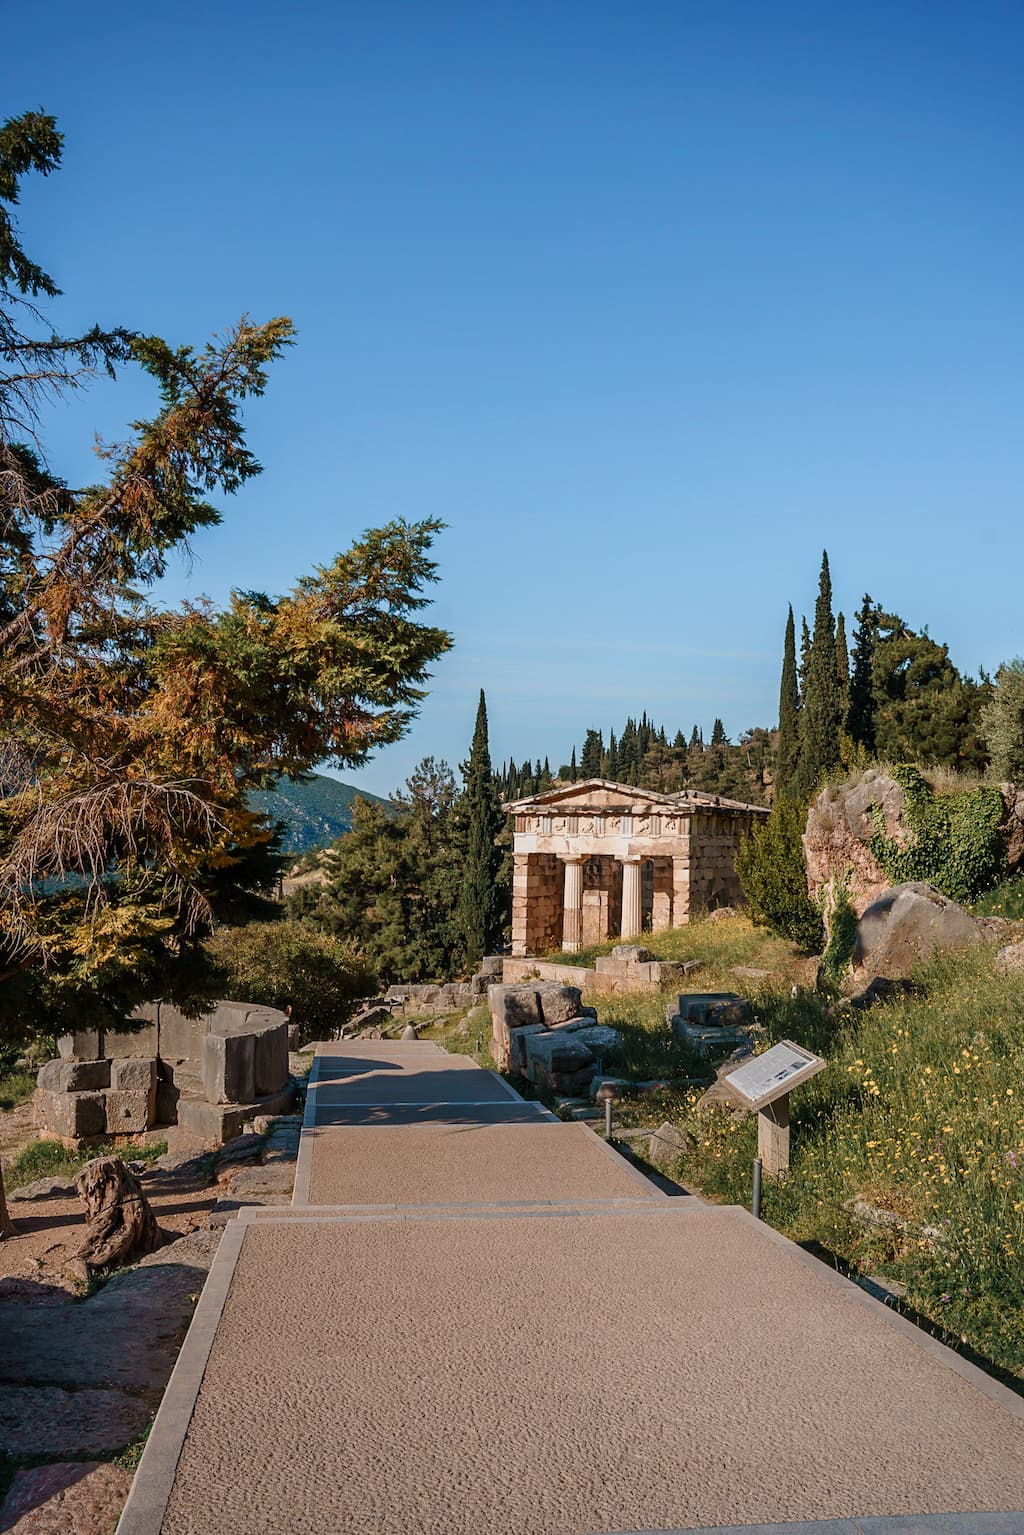 During your Delphi tour from Athens you'll get to see The Treasury.